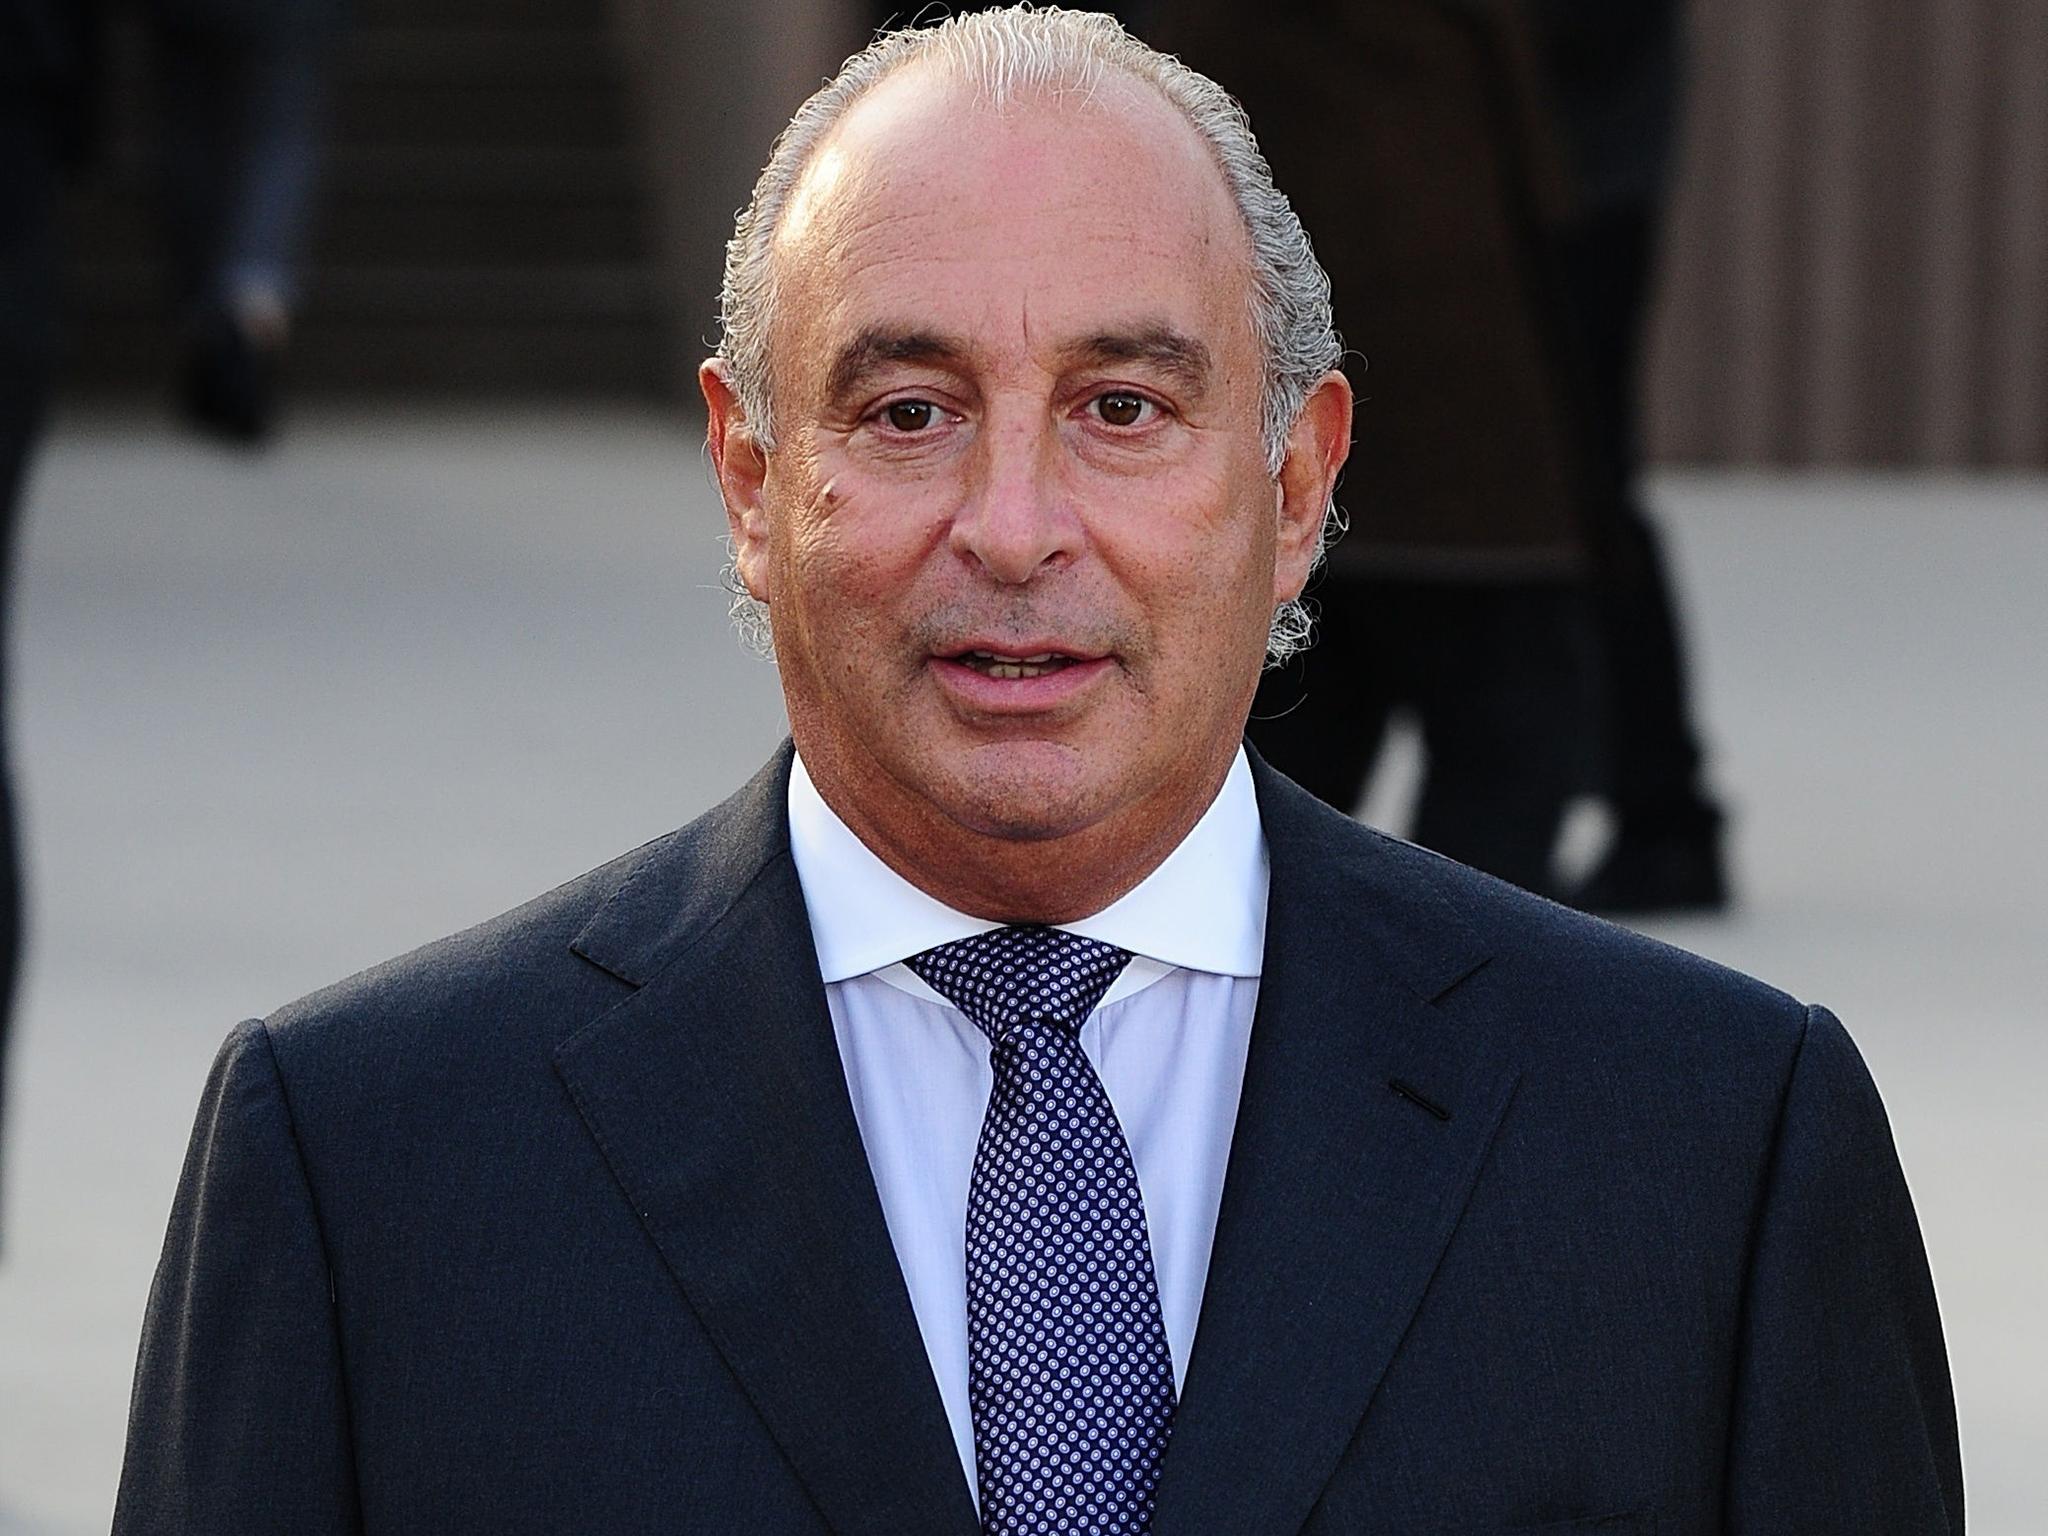 Regulators rejected Sir Philip Green’s £250m offer to plug the gap he left in the pensions scheme